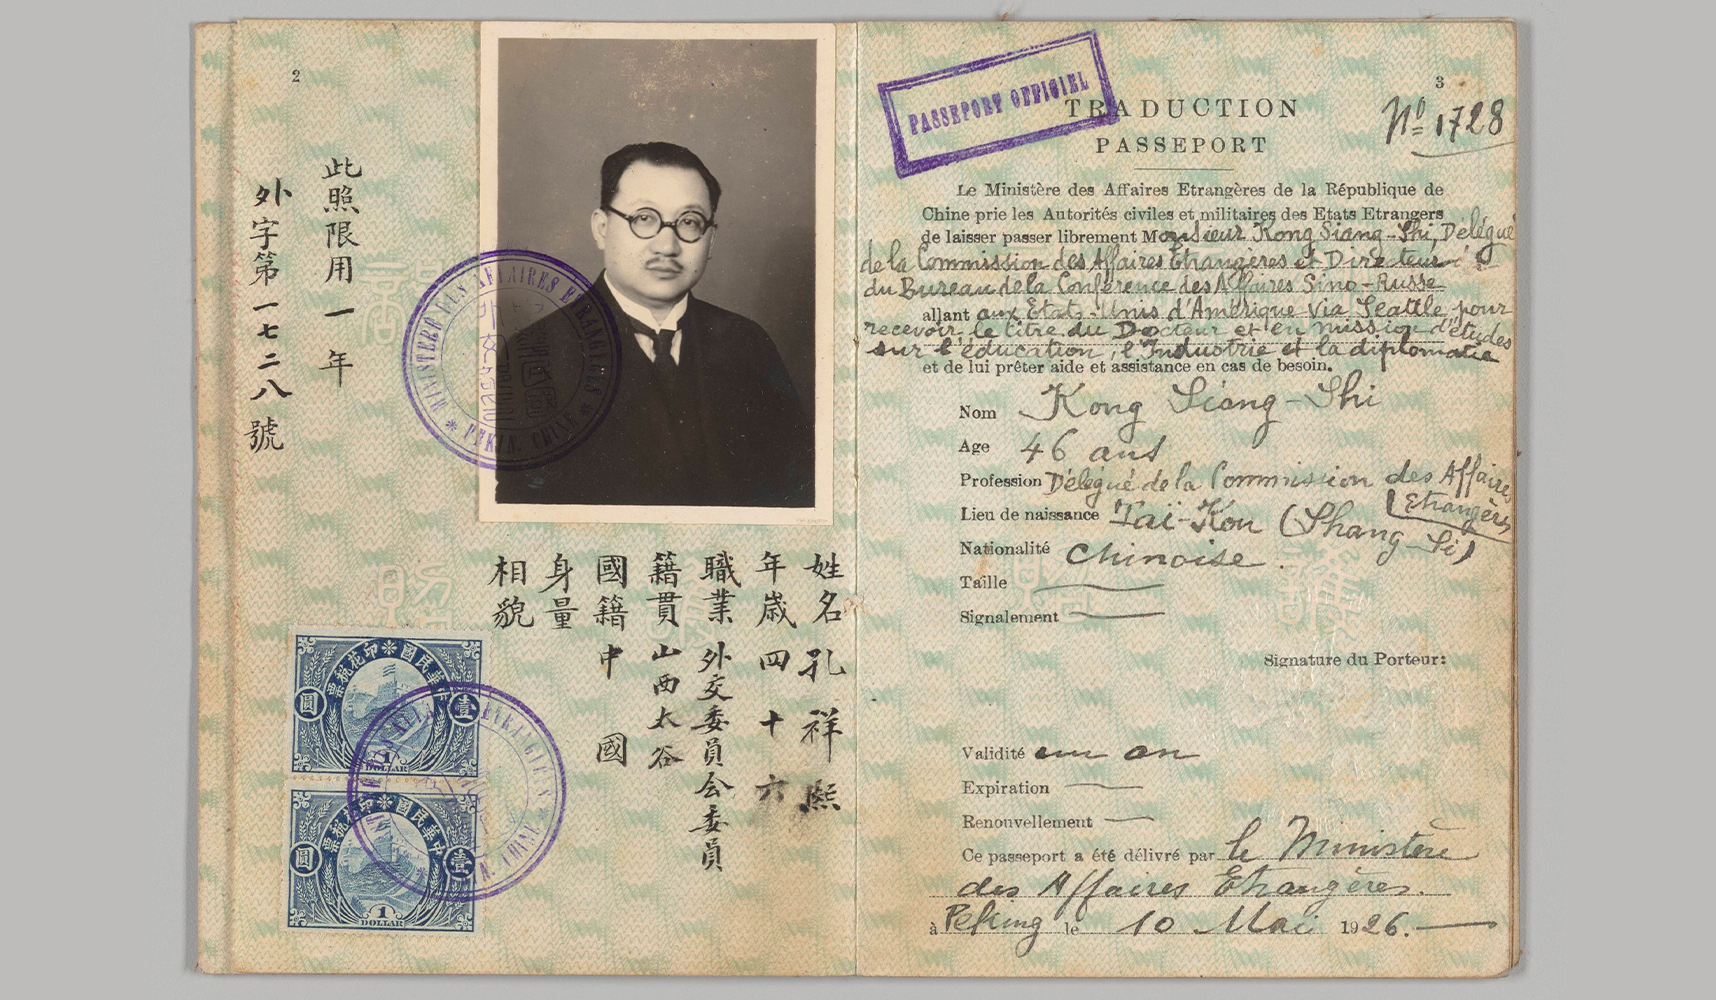 Photo of H.H. Kung's passport issued in 1926